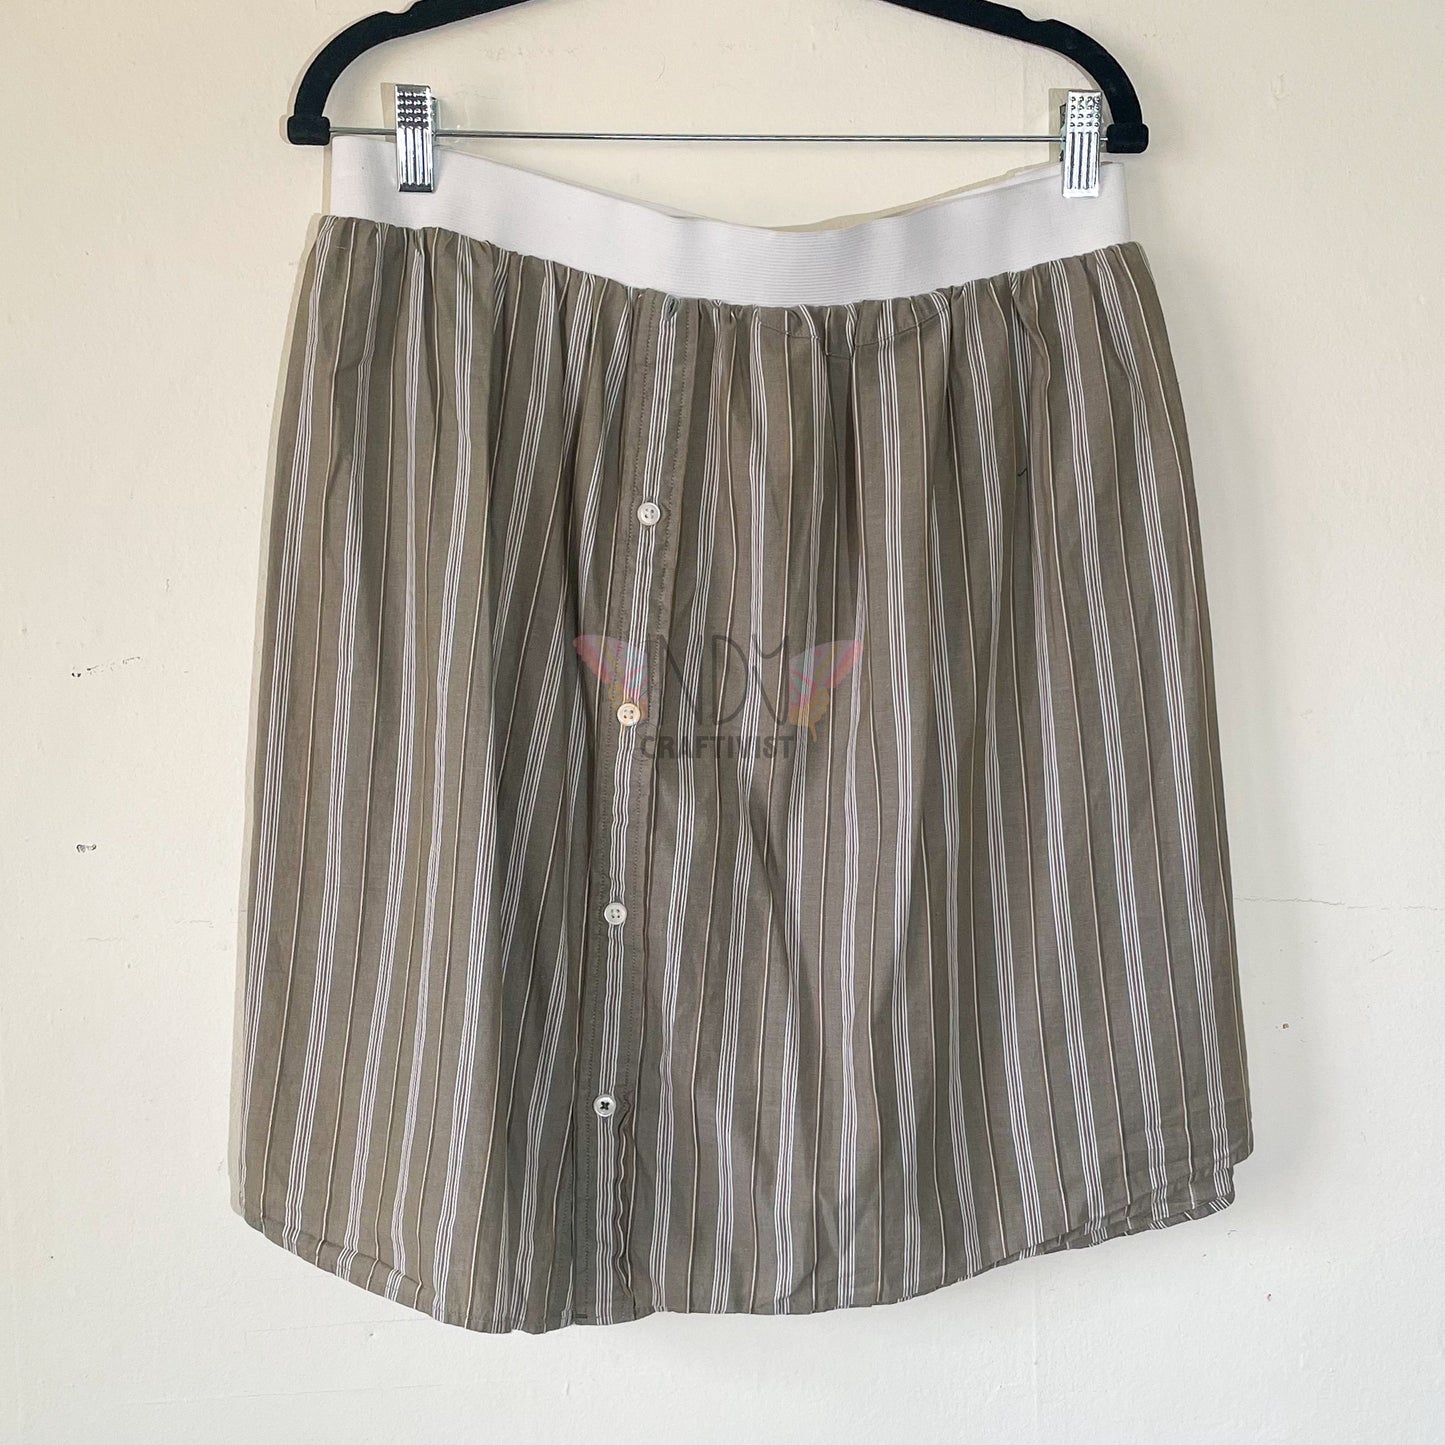 Striped Upcycled Men's Button Down Skirt